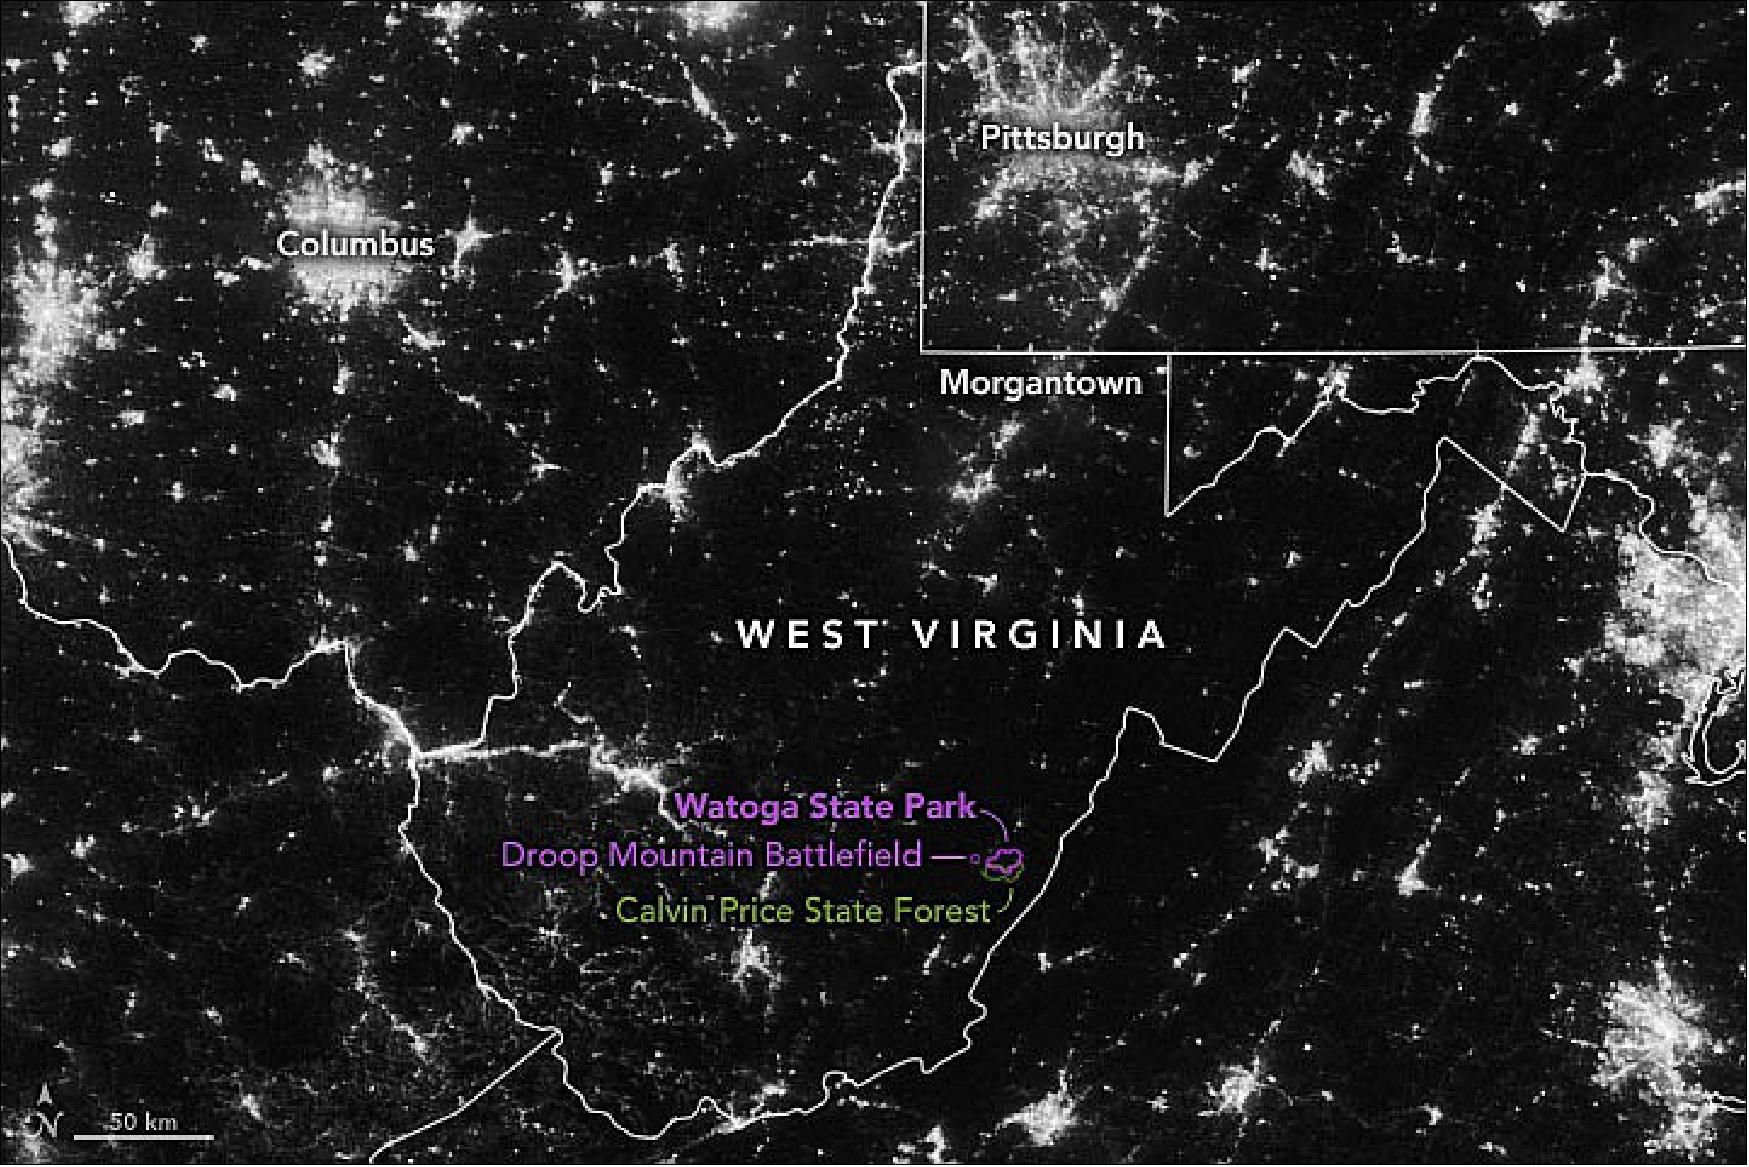 Figure 33: The remoteness of the area is evident in this nighttime image, which shows the pattern of human settlement across West Virginia. The image was acquired on April 24, 2022, with the Visible Infrared Imaging Radiometer Suite (VIIRS) on the Suomi NPP satellite. The image comes from the VIIRS “day-night band,” which detects light in a range of wavelengths from green to near-infrared and uses filtering techniques to observe signals such as auroras, city lights, and reflected moonlight (image credit: NASA Earth Observatory images by Joshua Stevens, using VIIRS day-night band data from the Suomi National Polar-orbiting Partnership and Landsat data from the U.S. Geological Survey. Photograph by Jeff Ball. Story by Kathryn Hansen)